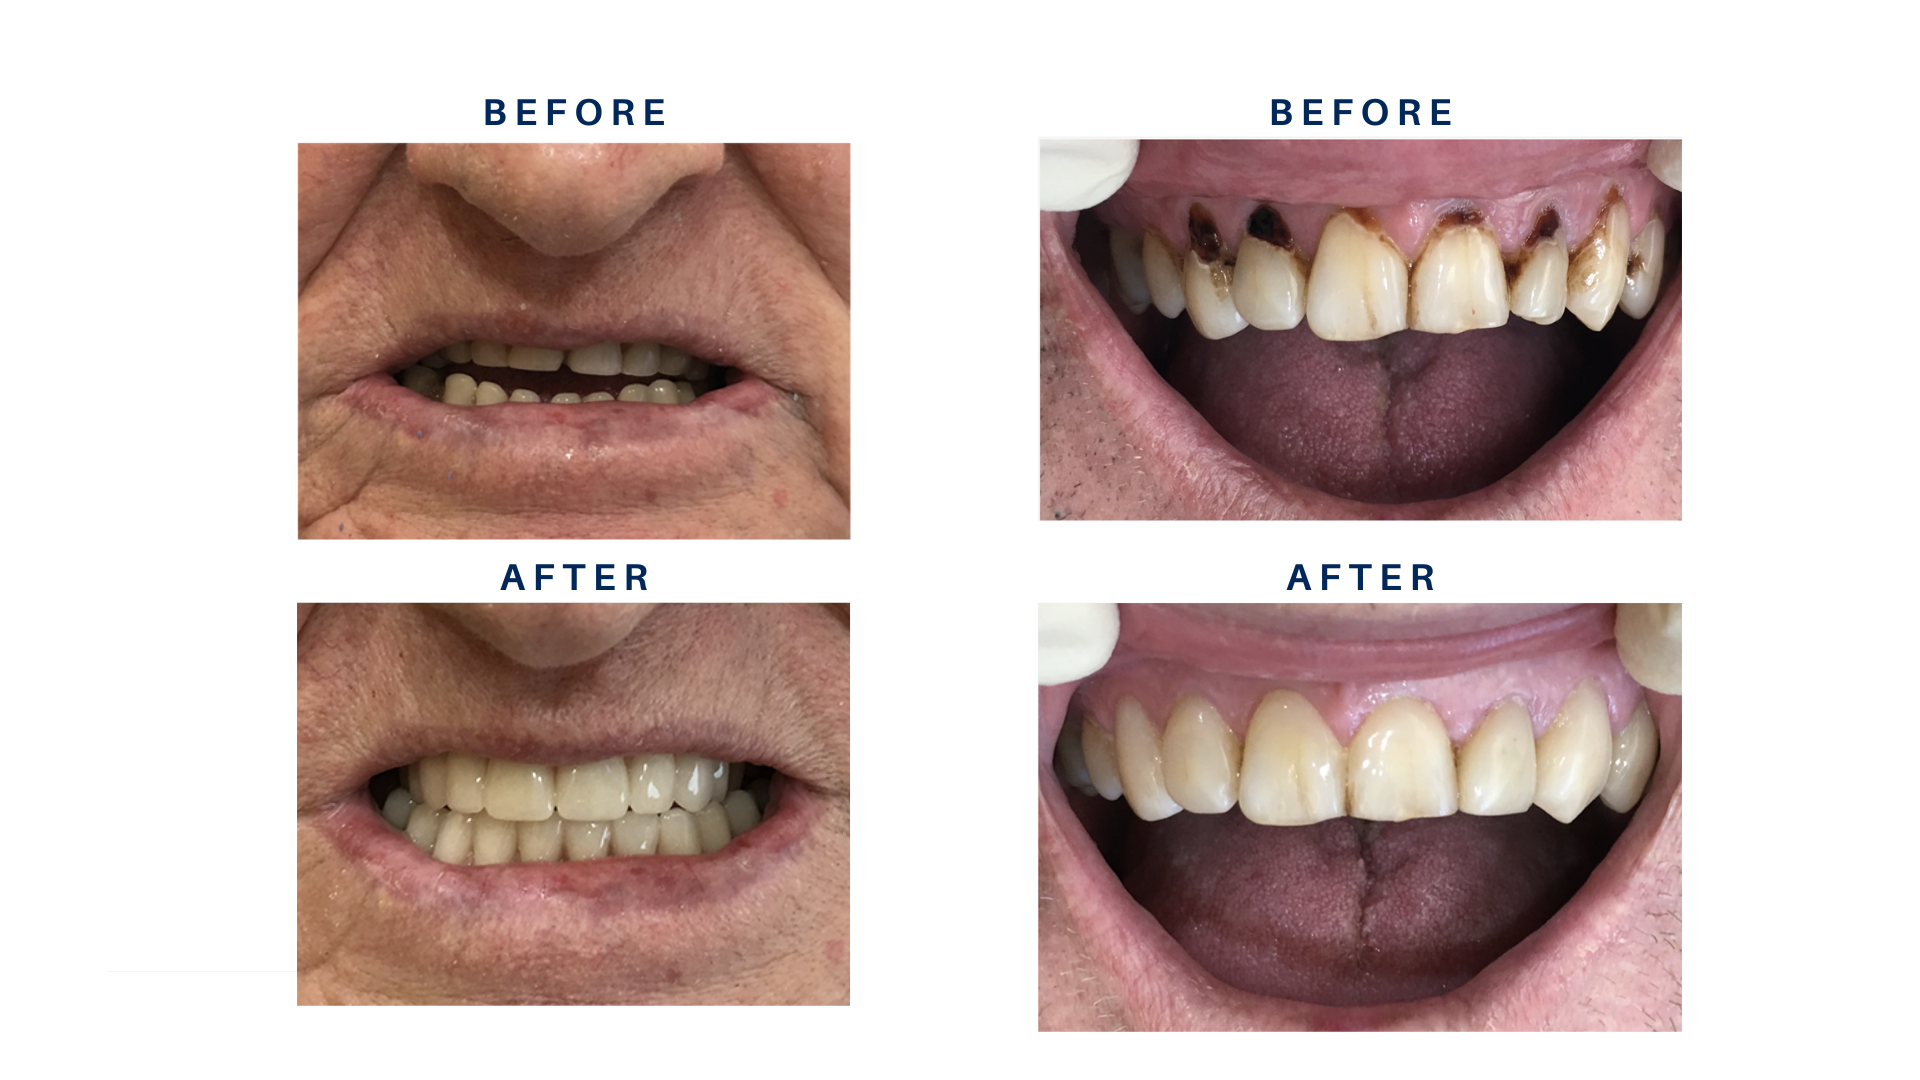 Before and After Pictures dental work done by Dr Mahi